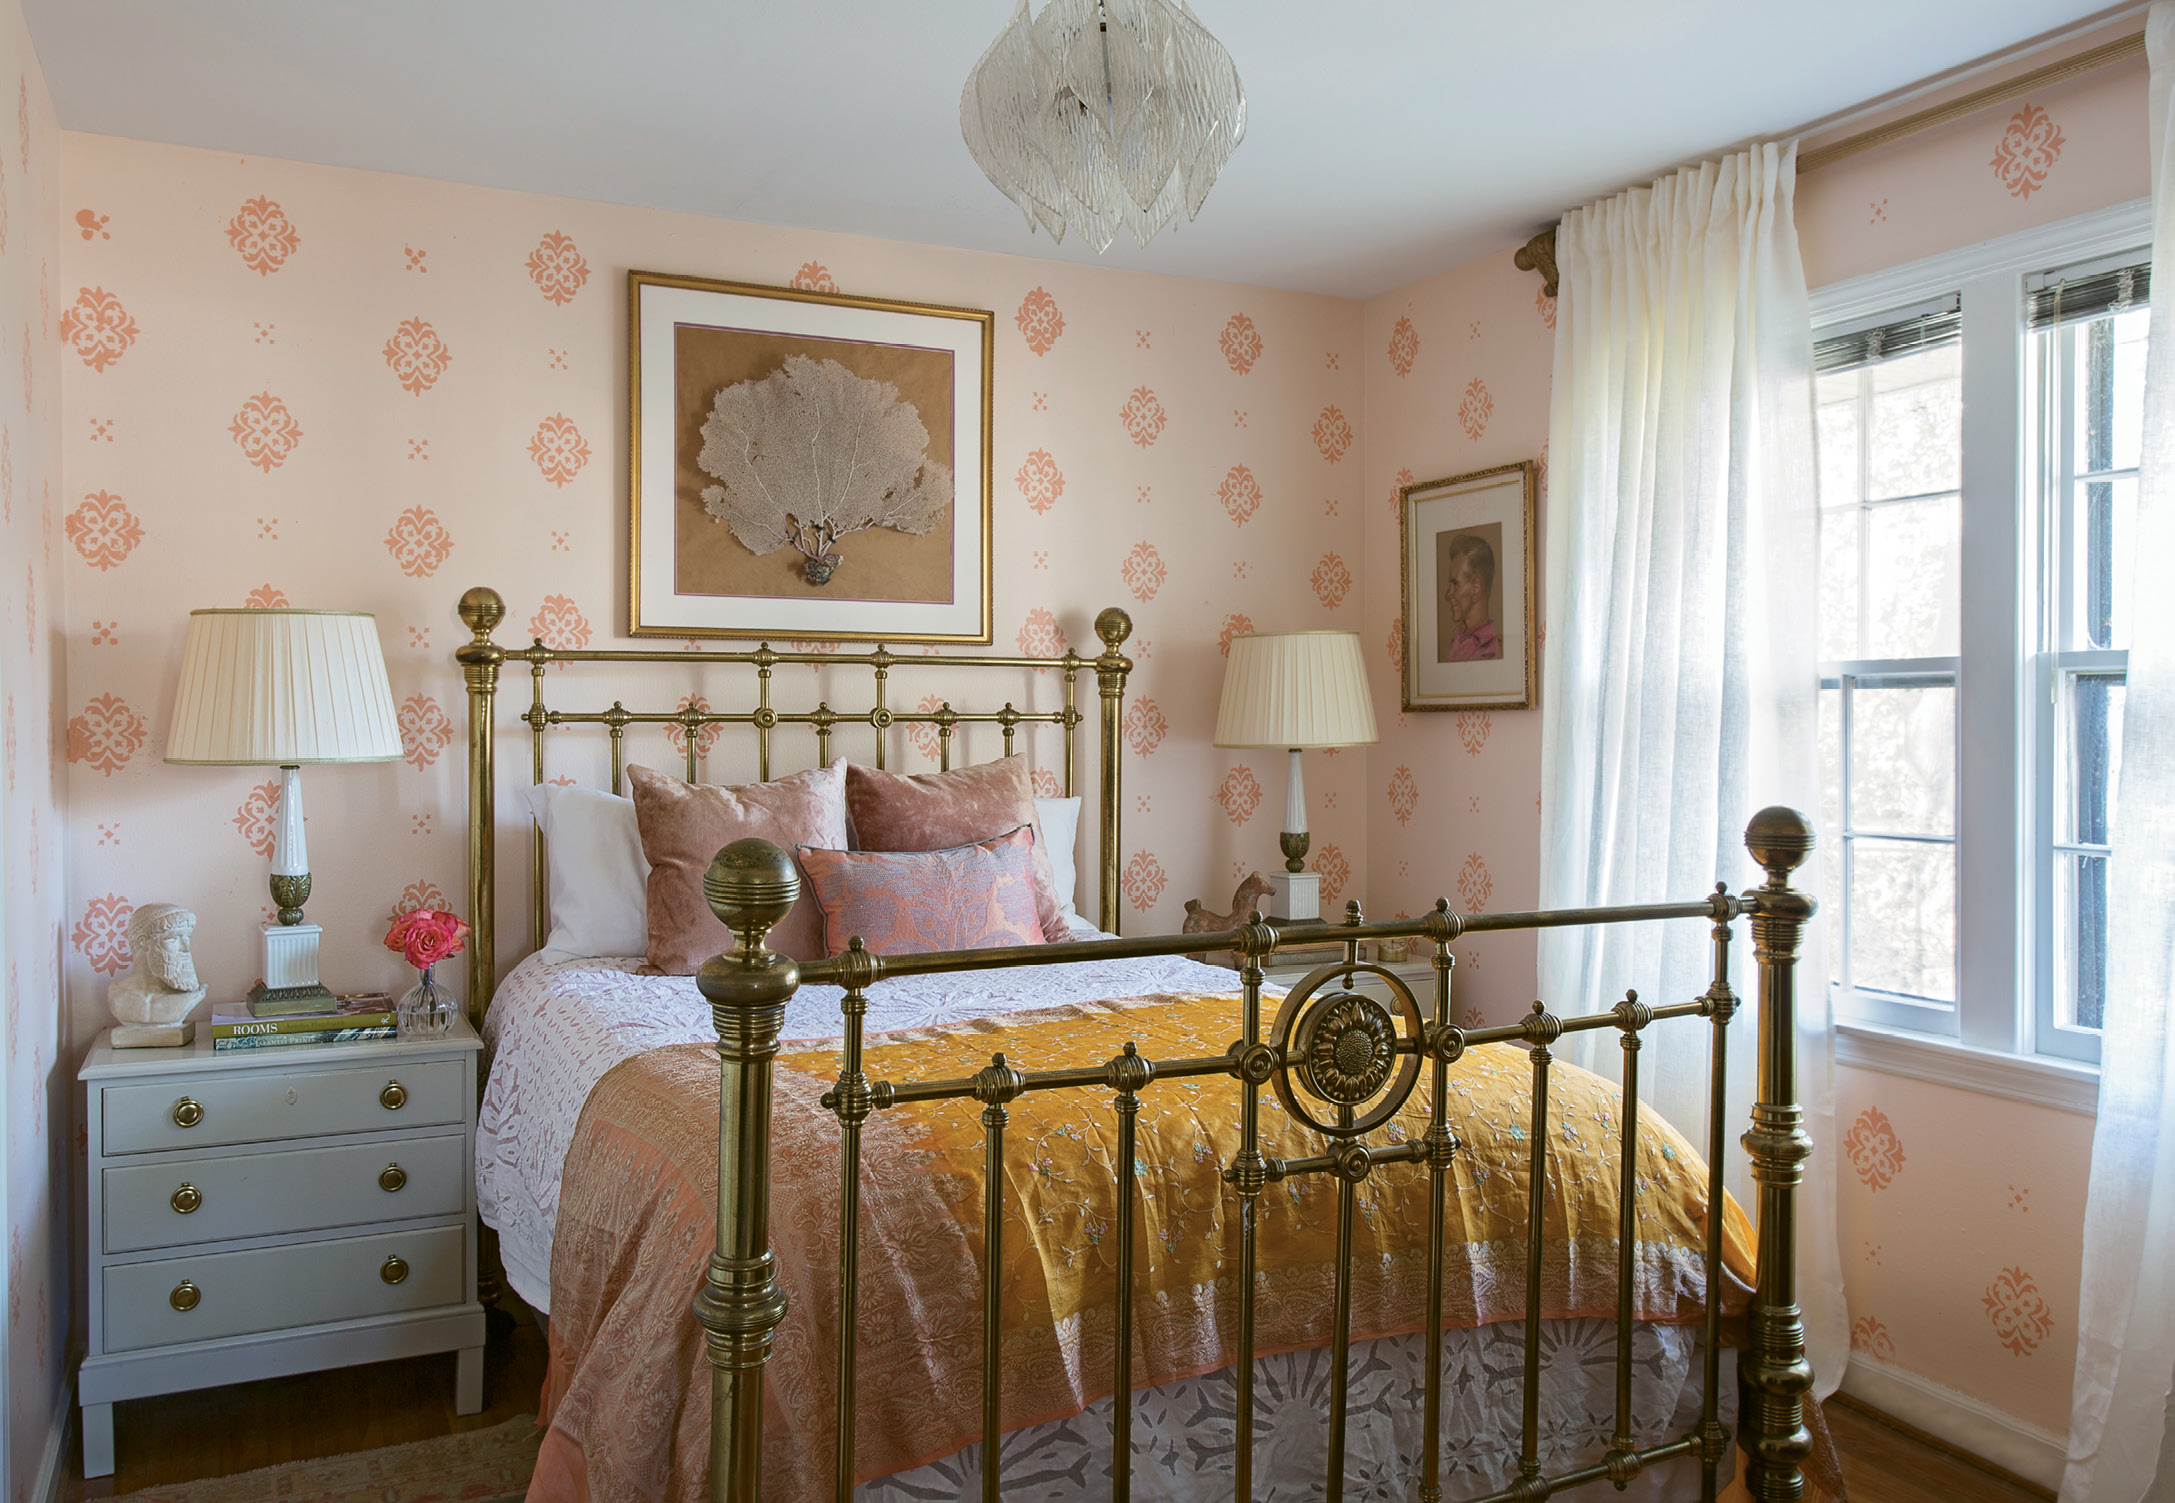 PRETTY IN PINK: In Tinkler’s bedroom, a pink-on-pink hand-stenciled motif is more affordable (but no less stunning) than wallpaper. Tall brass bedside lamps and a clear acrylic light fixture help the eight-foot ceilings seem higher.